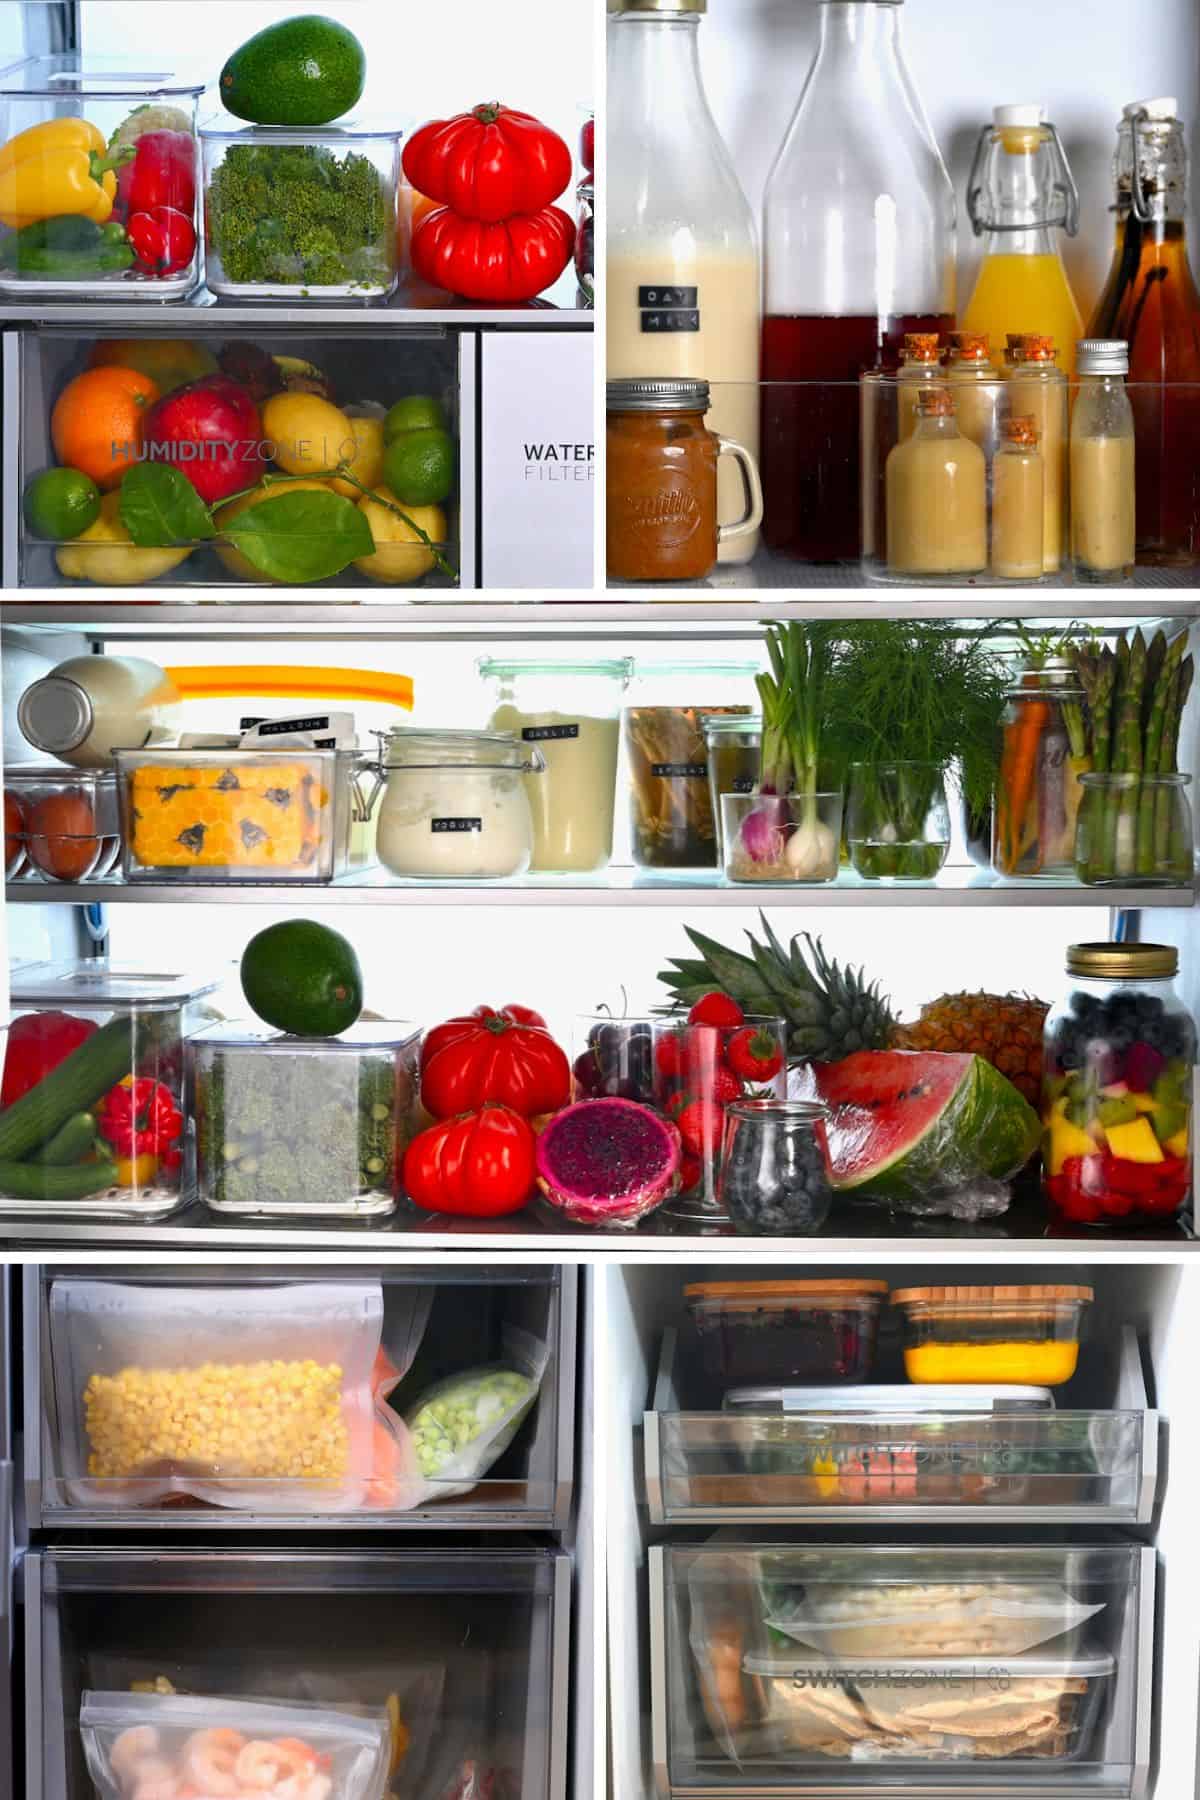 The different parts of the fridge